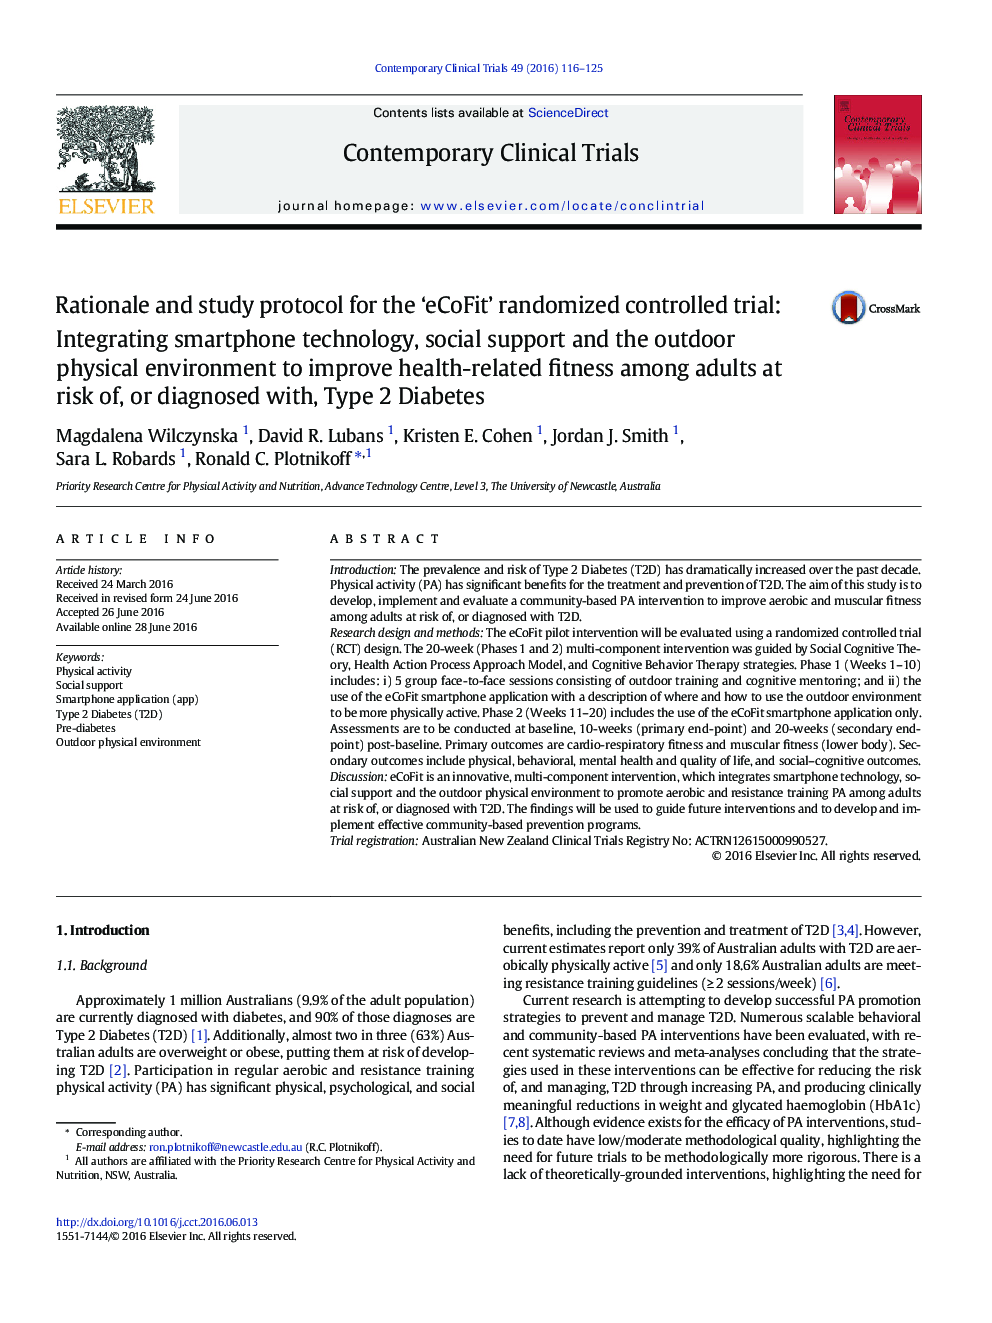 Rationale and study protocol for the 'eCoFit' randomized controlled trial: Integrating smartphone technology, social support and the outdoor physical environment to improve health-related fitness among adults at risk of, or diagnosed with, Type 2 Diabetes